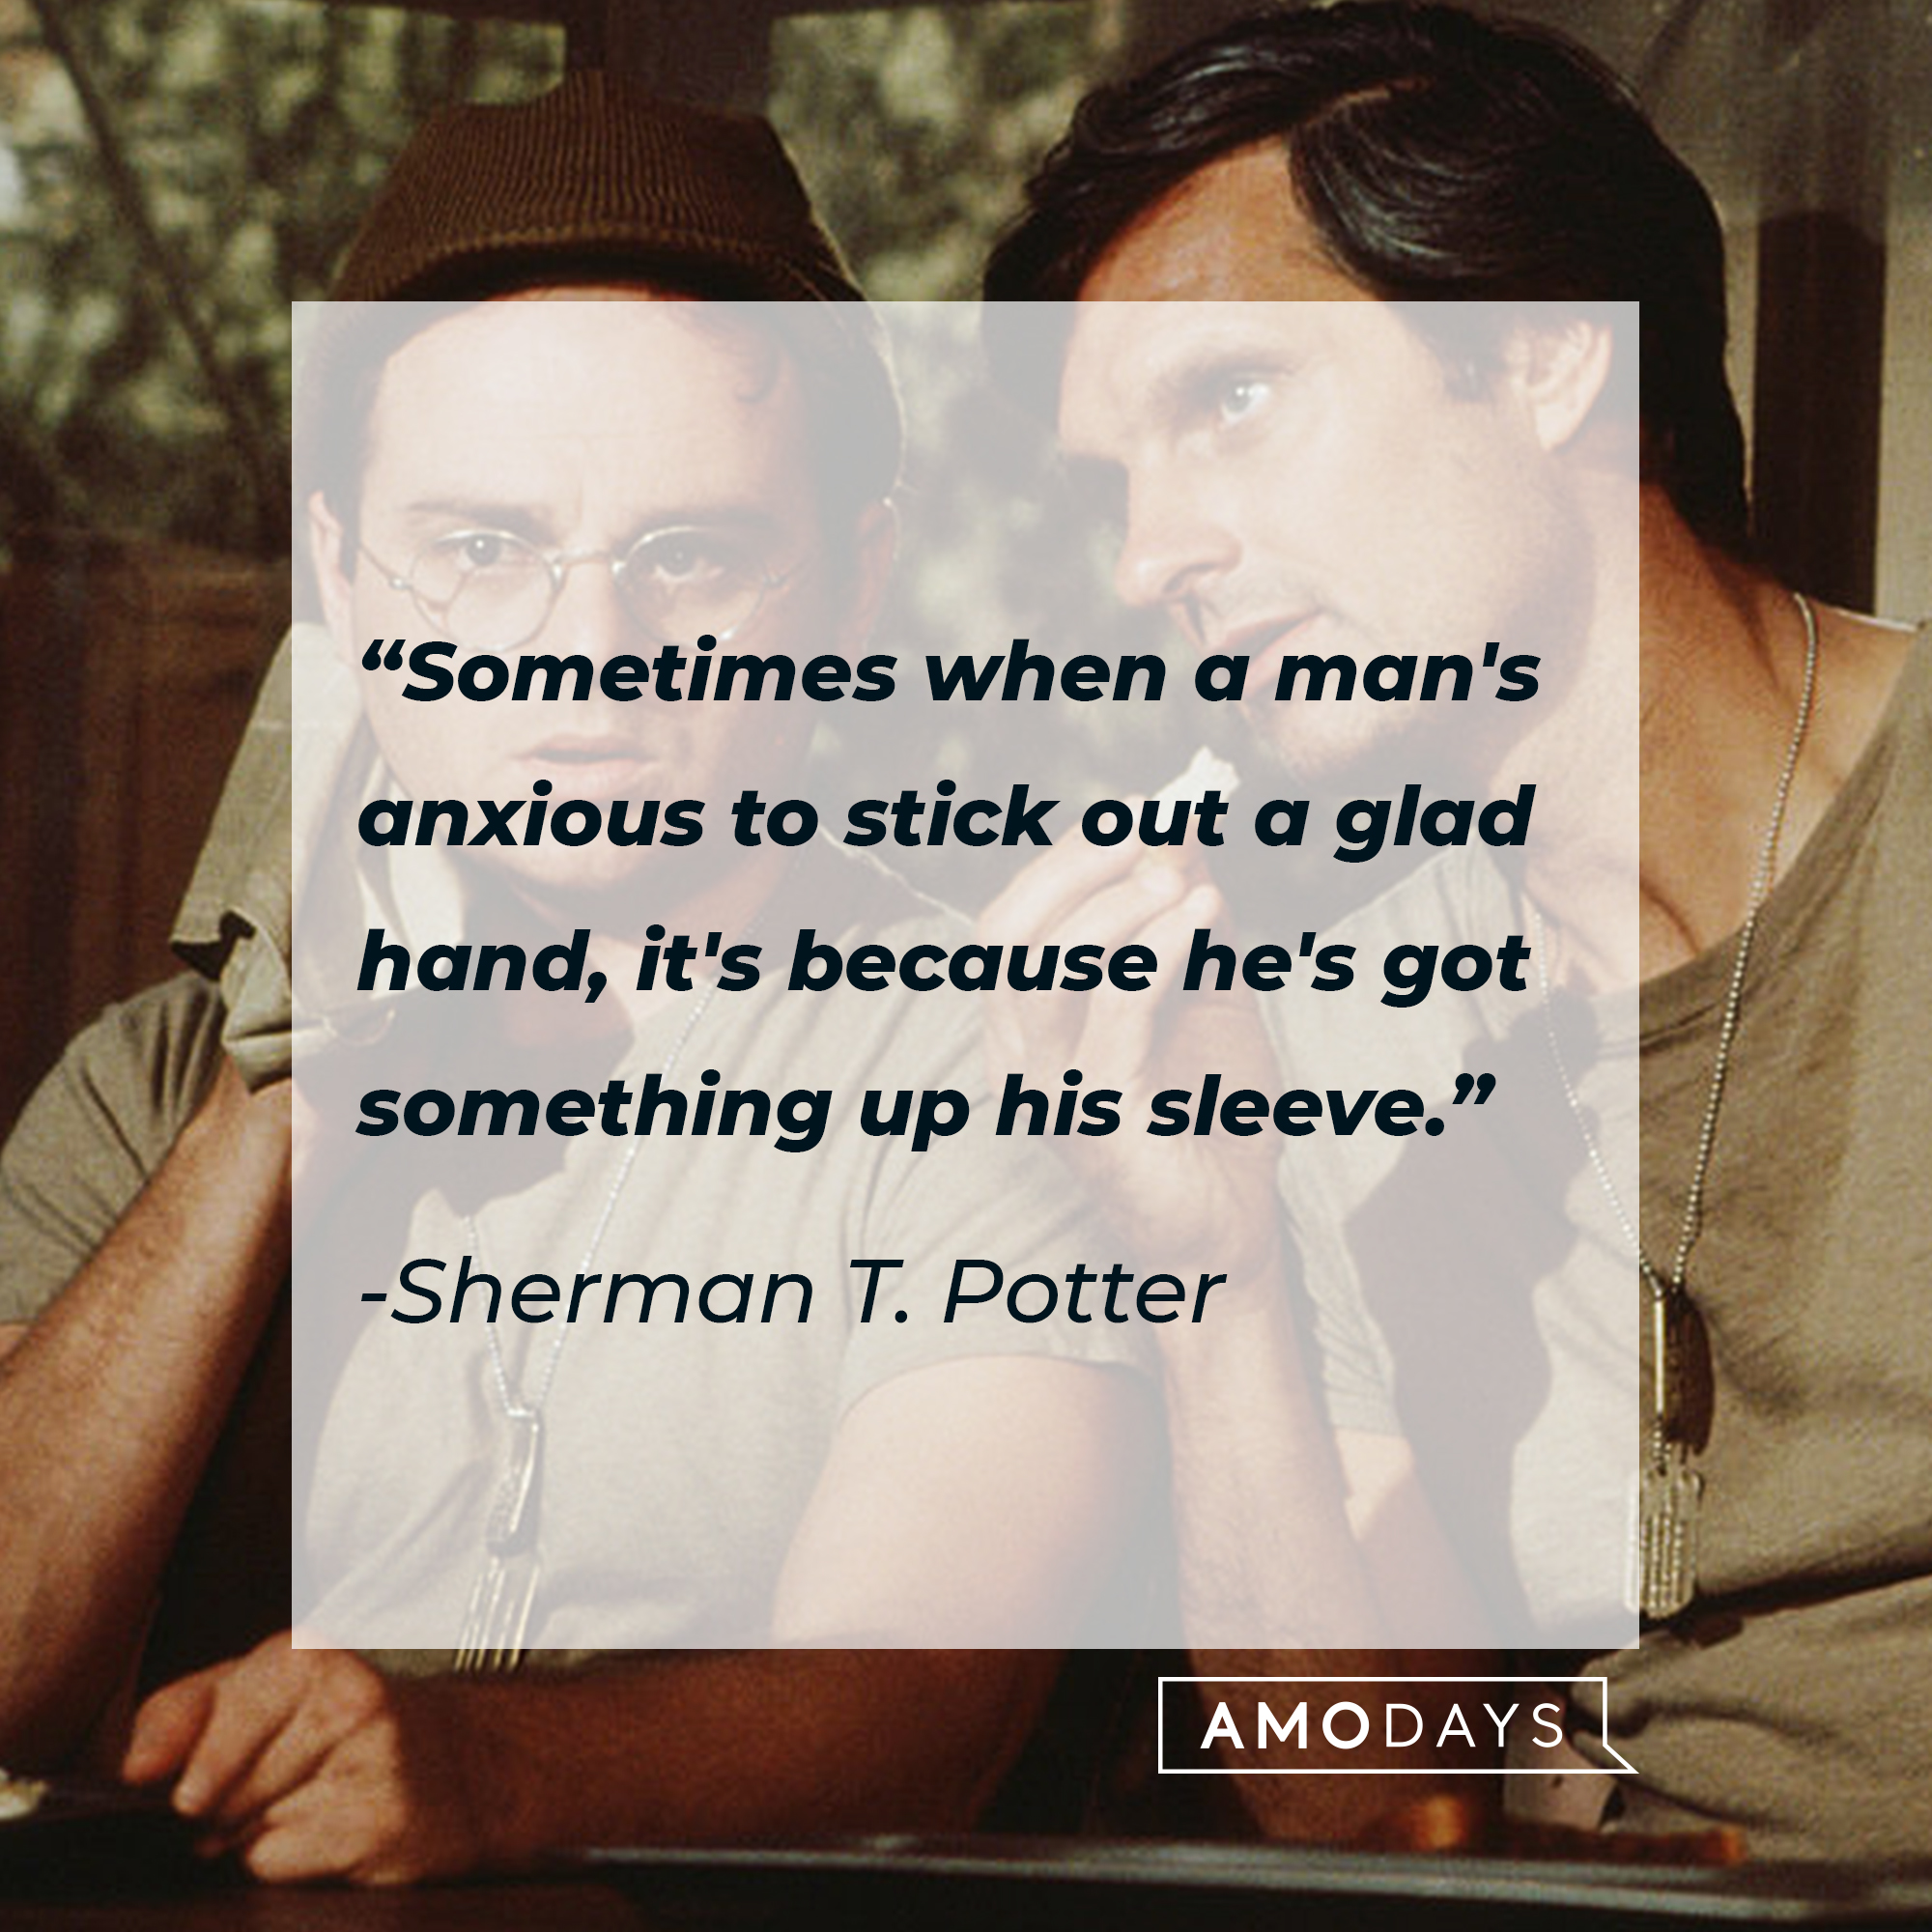 Sherman T. Potter's quote: "Sometimes when a man's anxious to stick out a glad hand, it's because he's got something up his sleeve." | Source: Getty Images